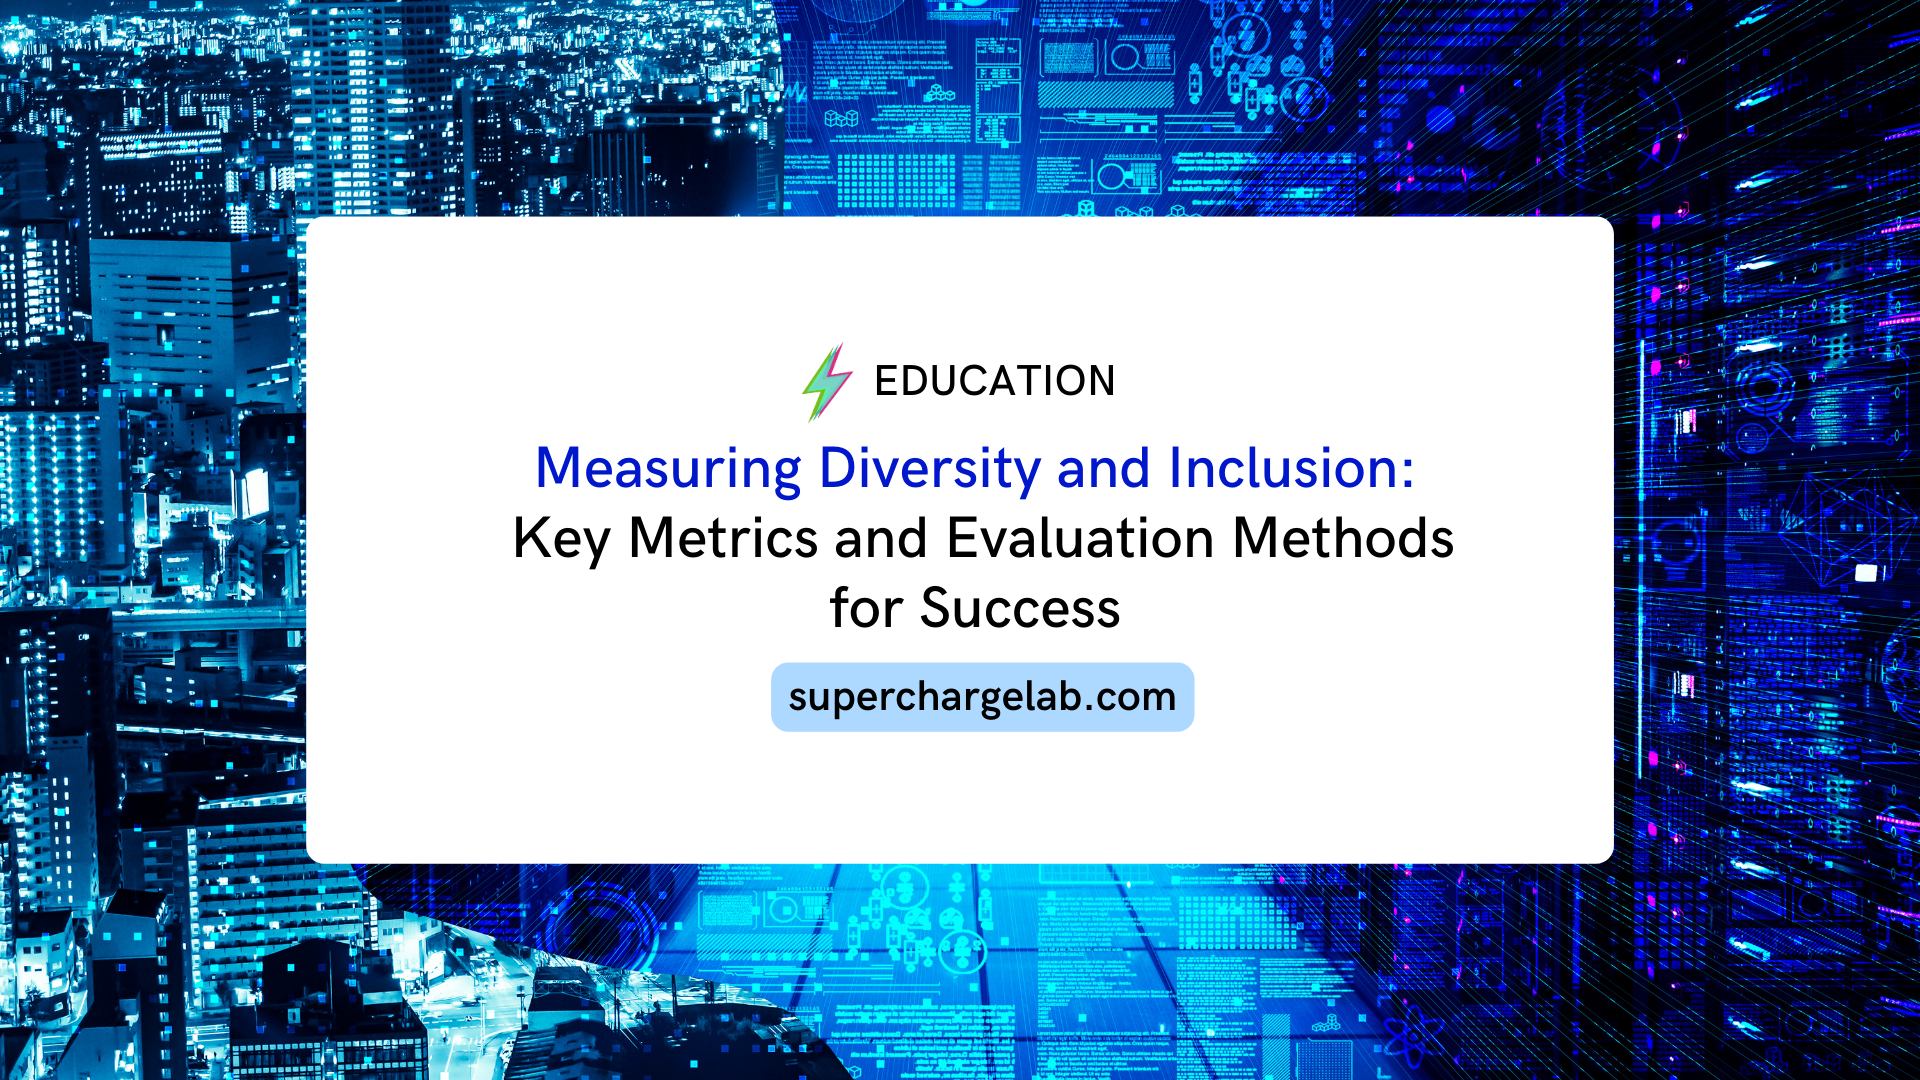 Measuring Diversity and Inclusion: Key Metrics and Evaluation Methods for Success